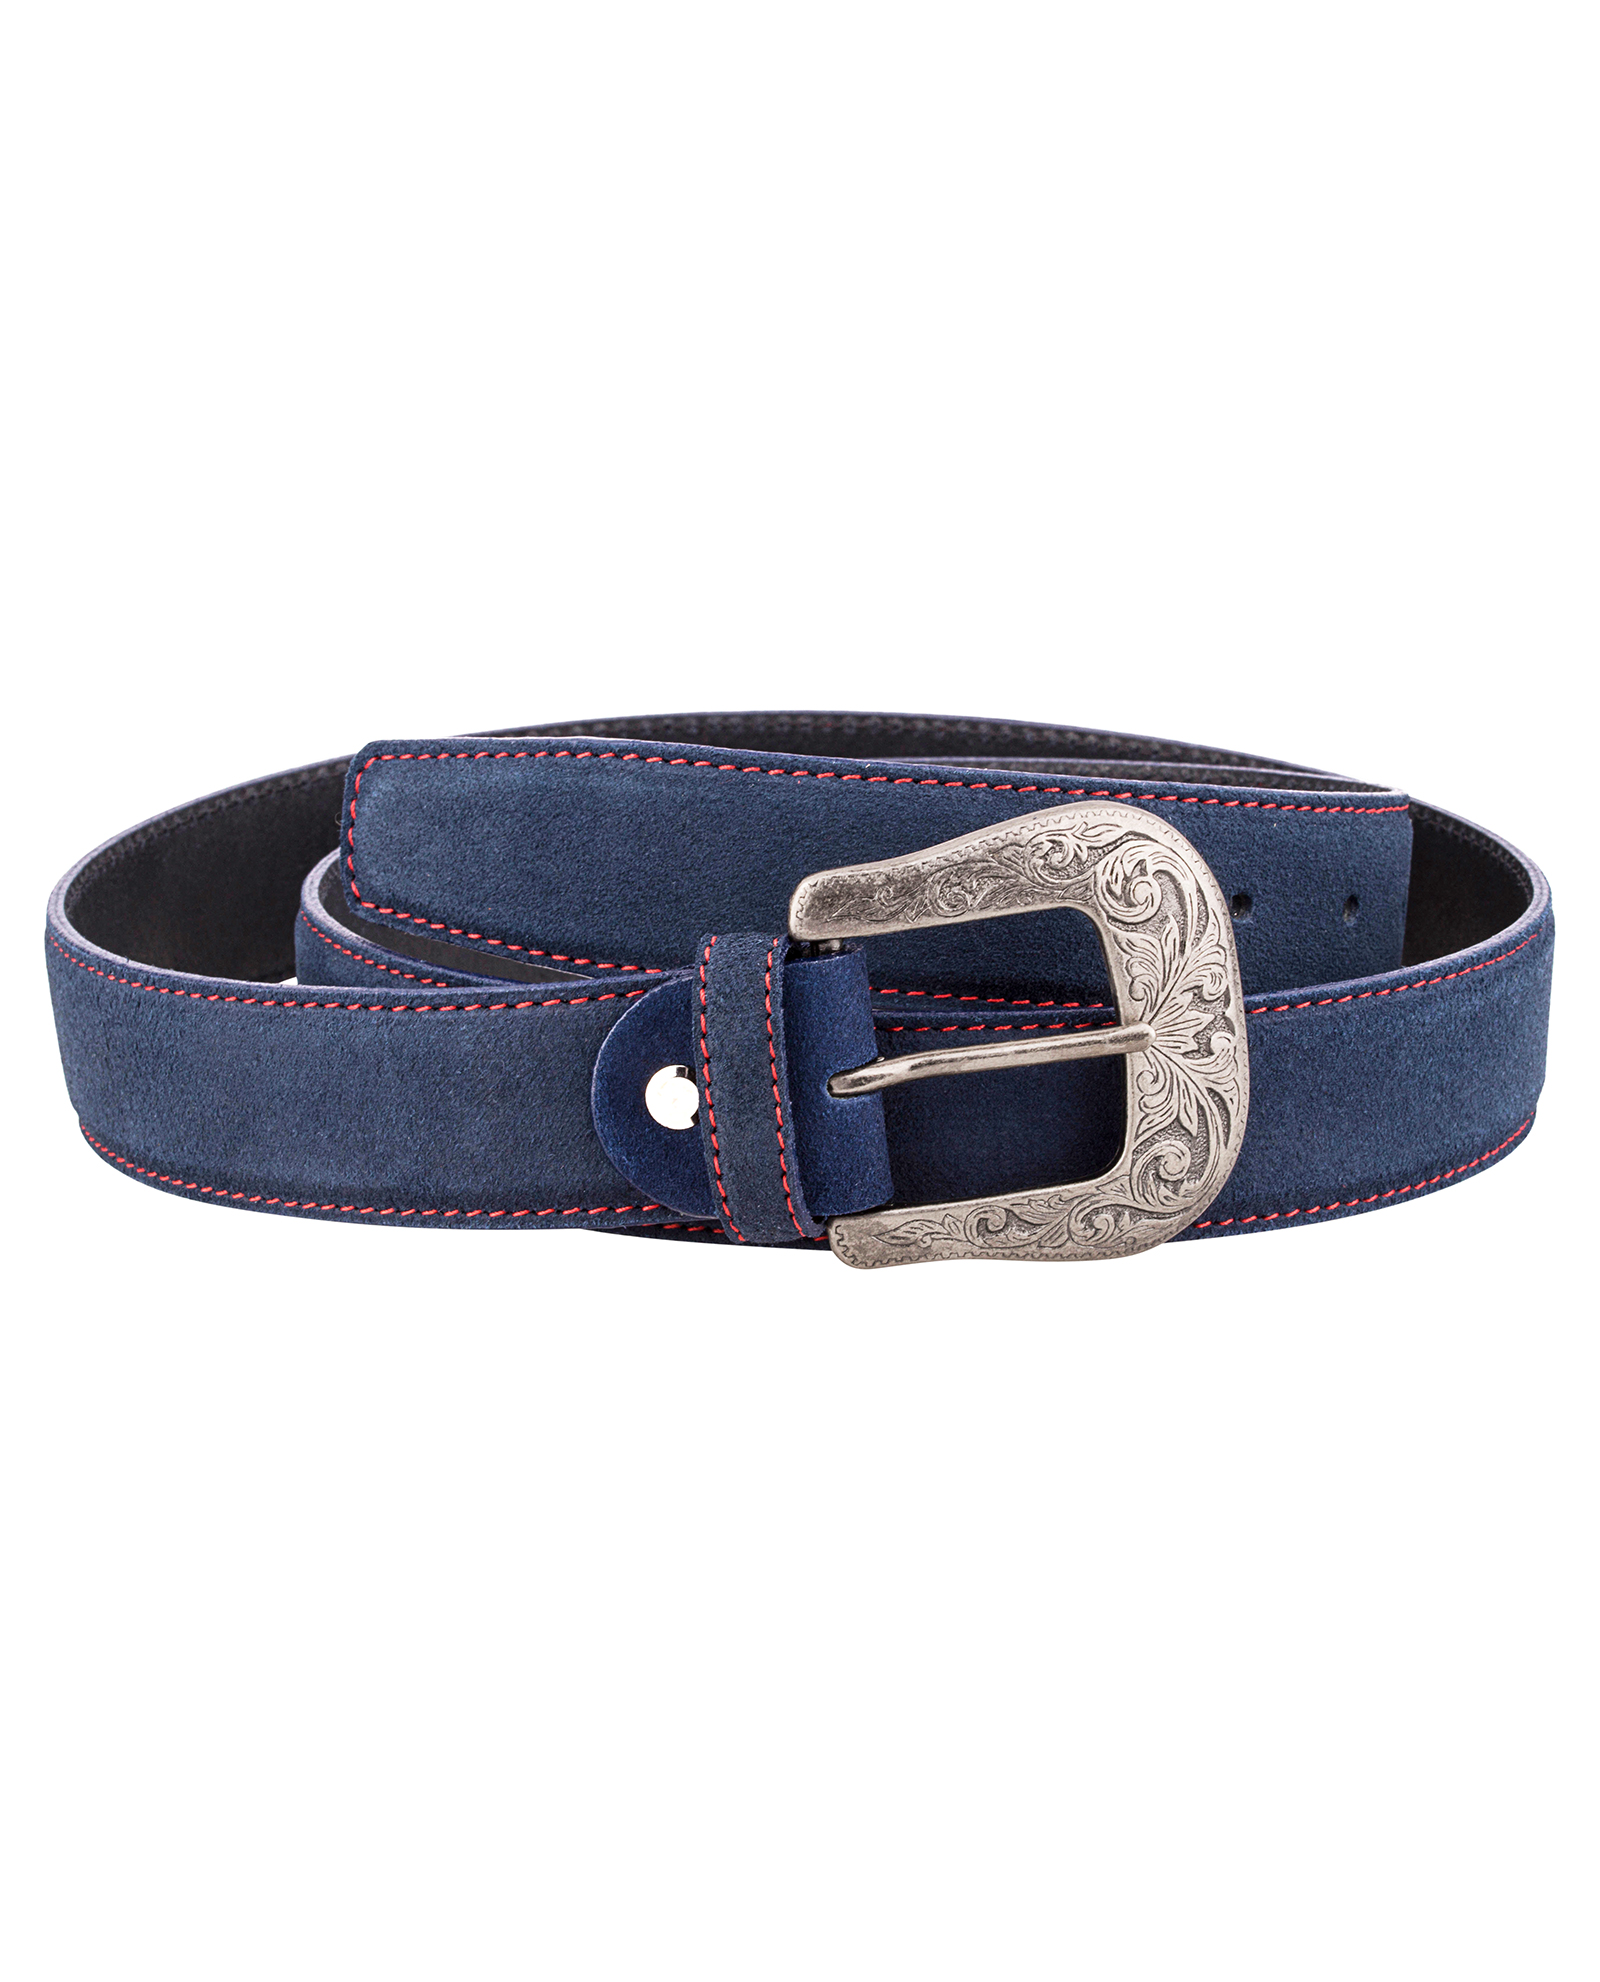 Buy Blue Western Leather Belt - Silver Antique Buckle - Free Shipping